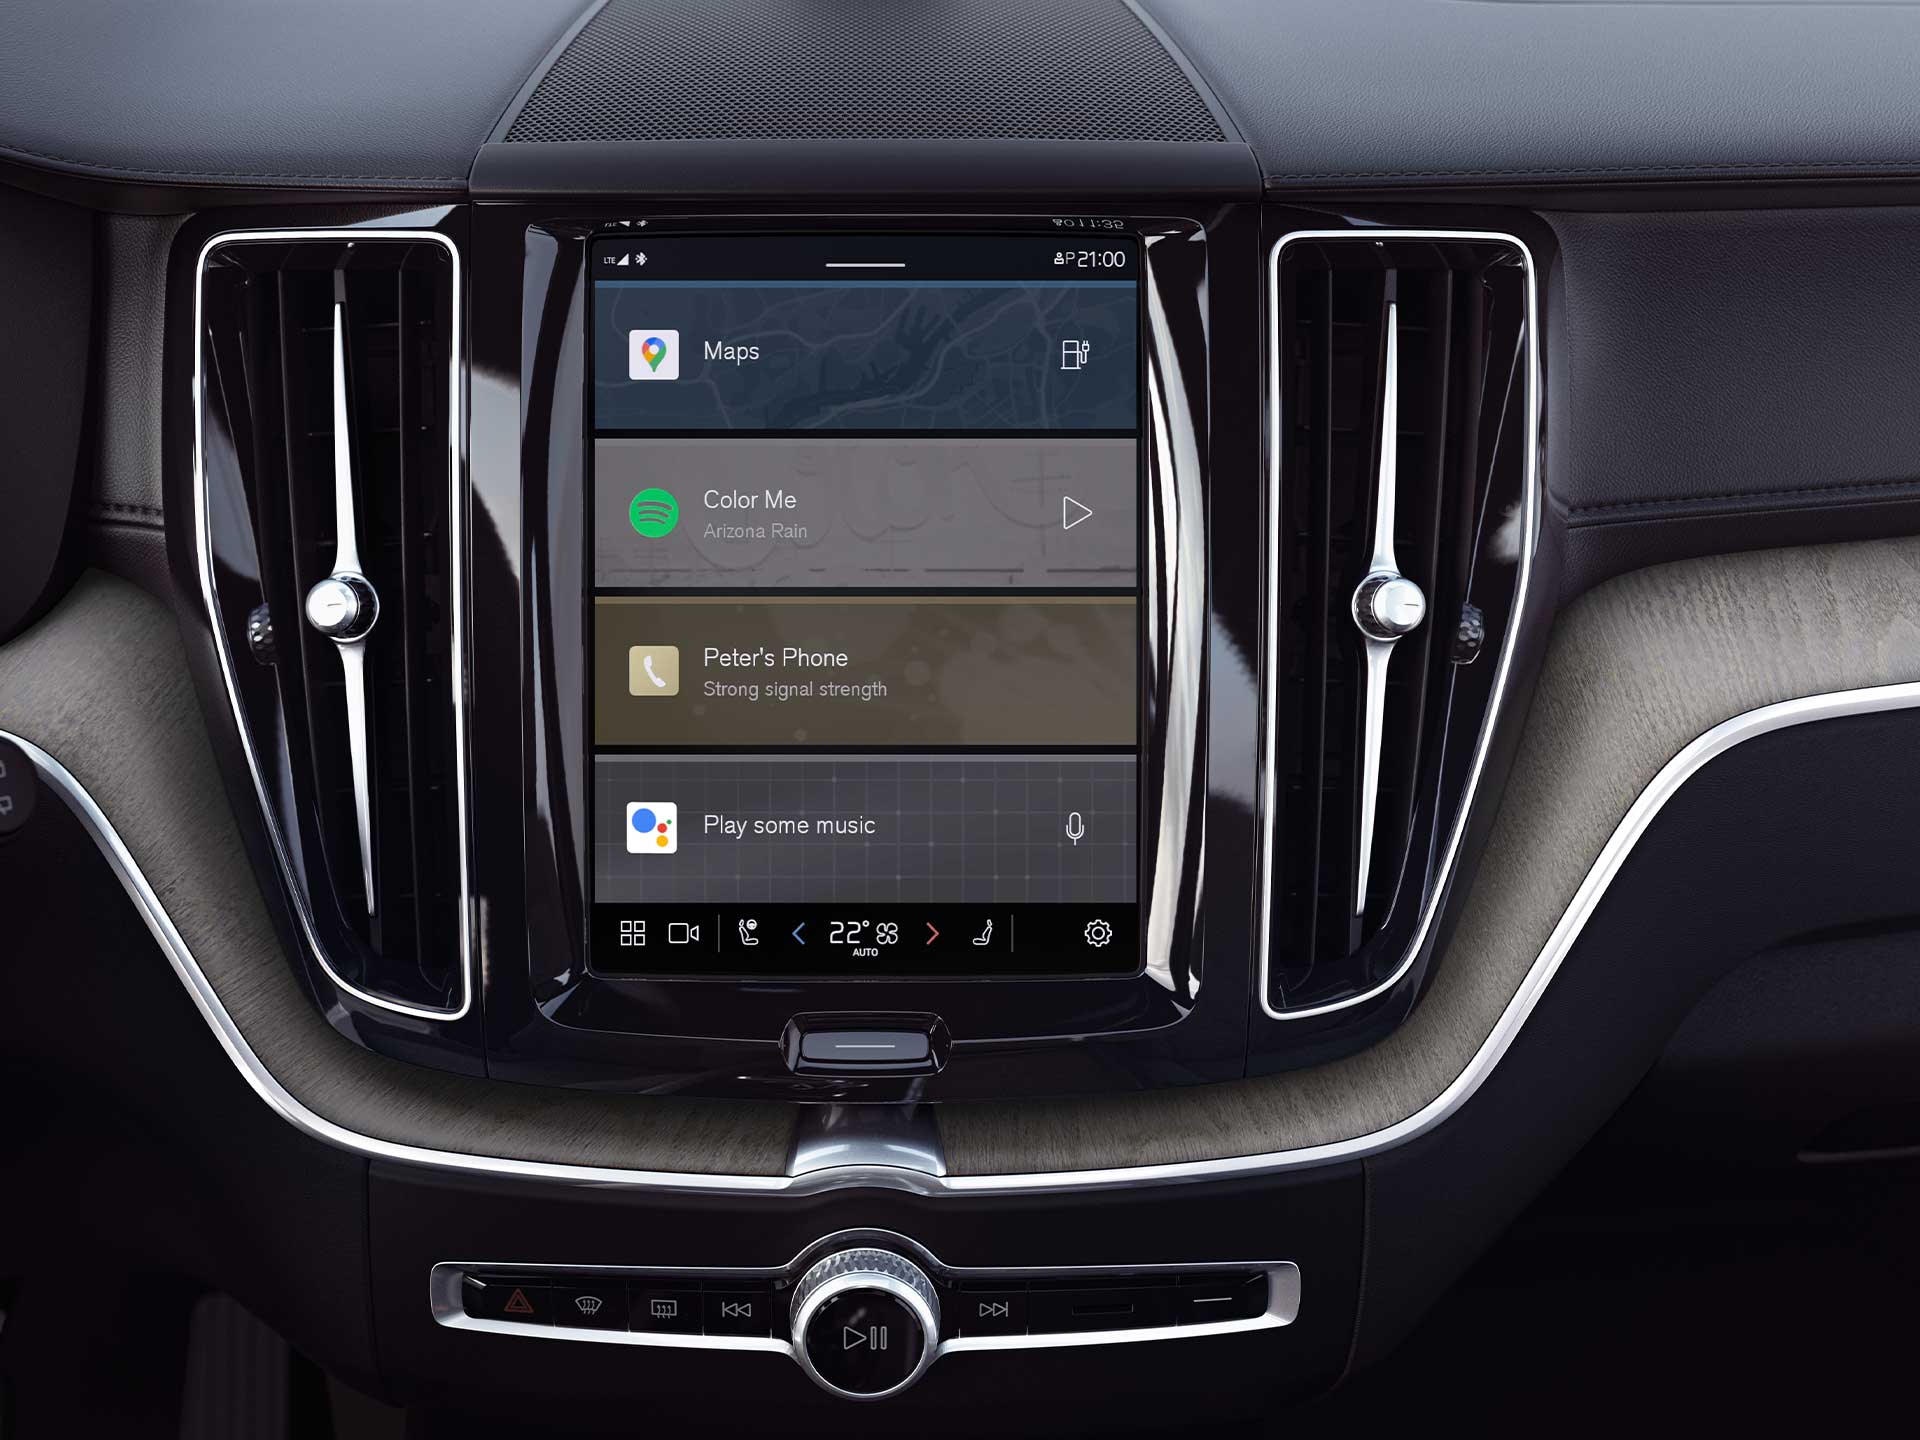 Infotainment centre display on a Volvo XC60.